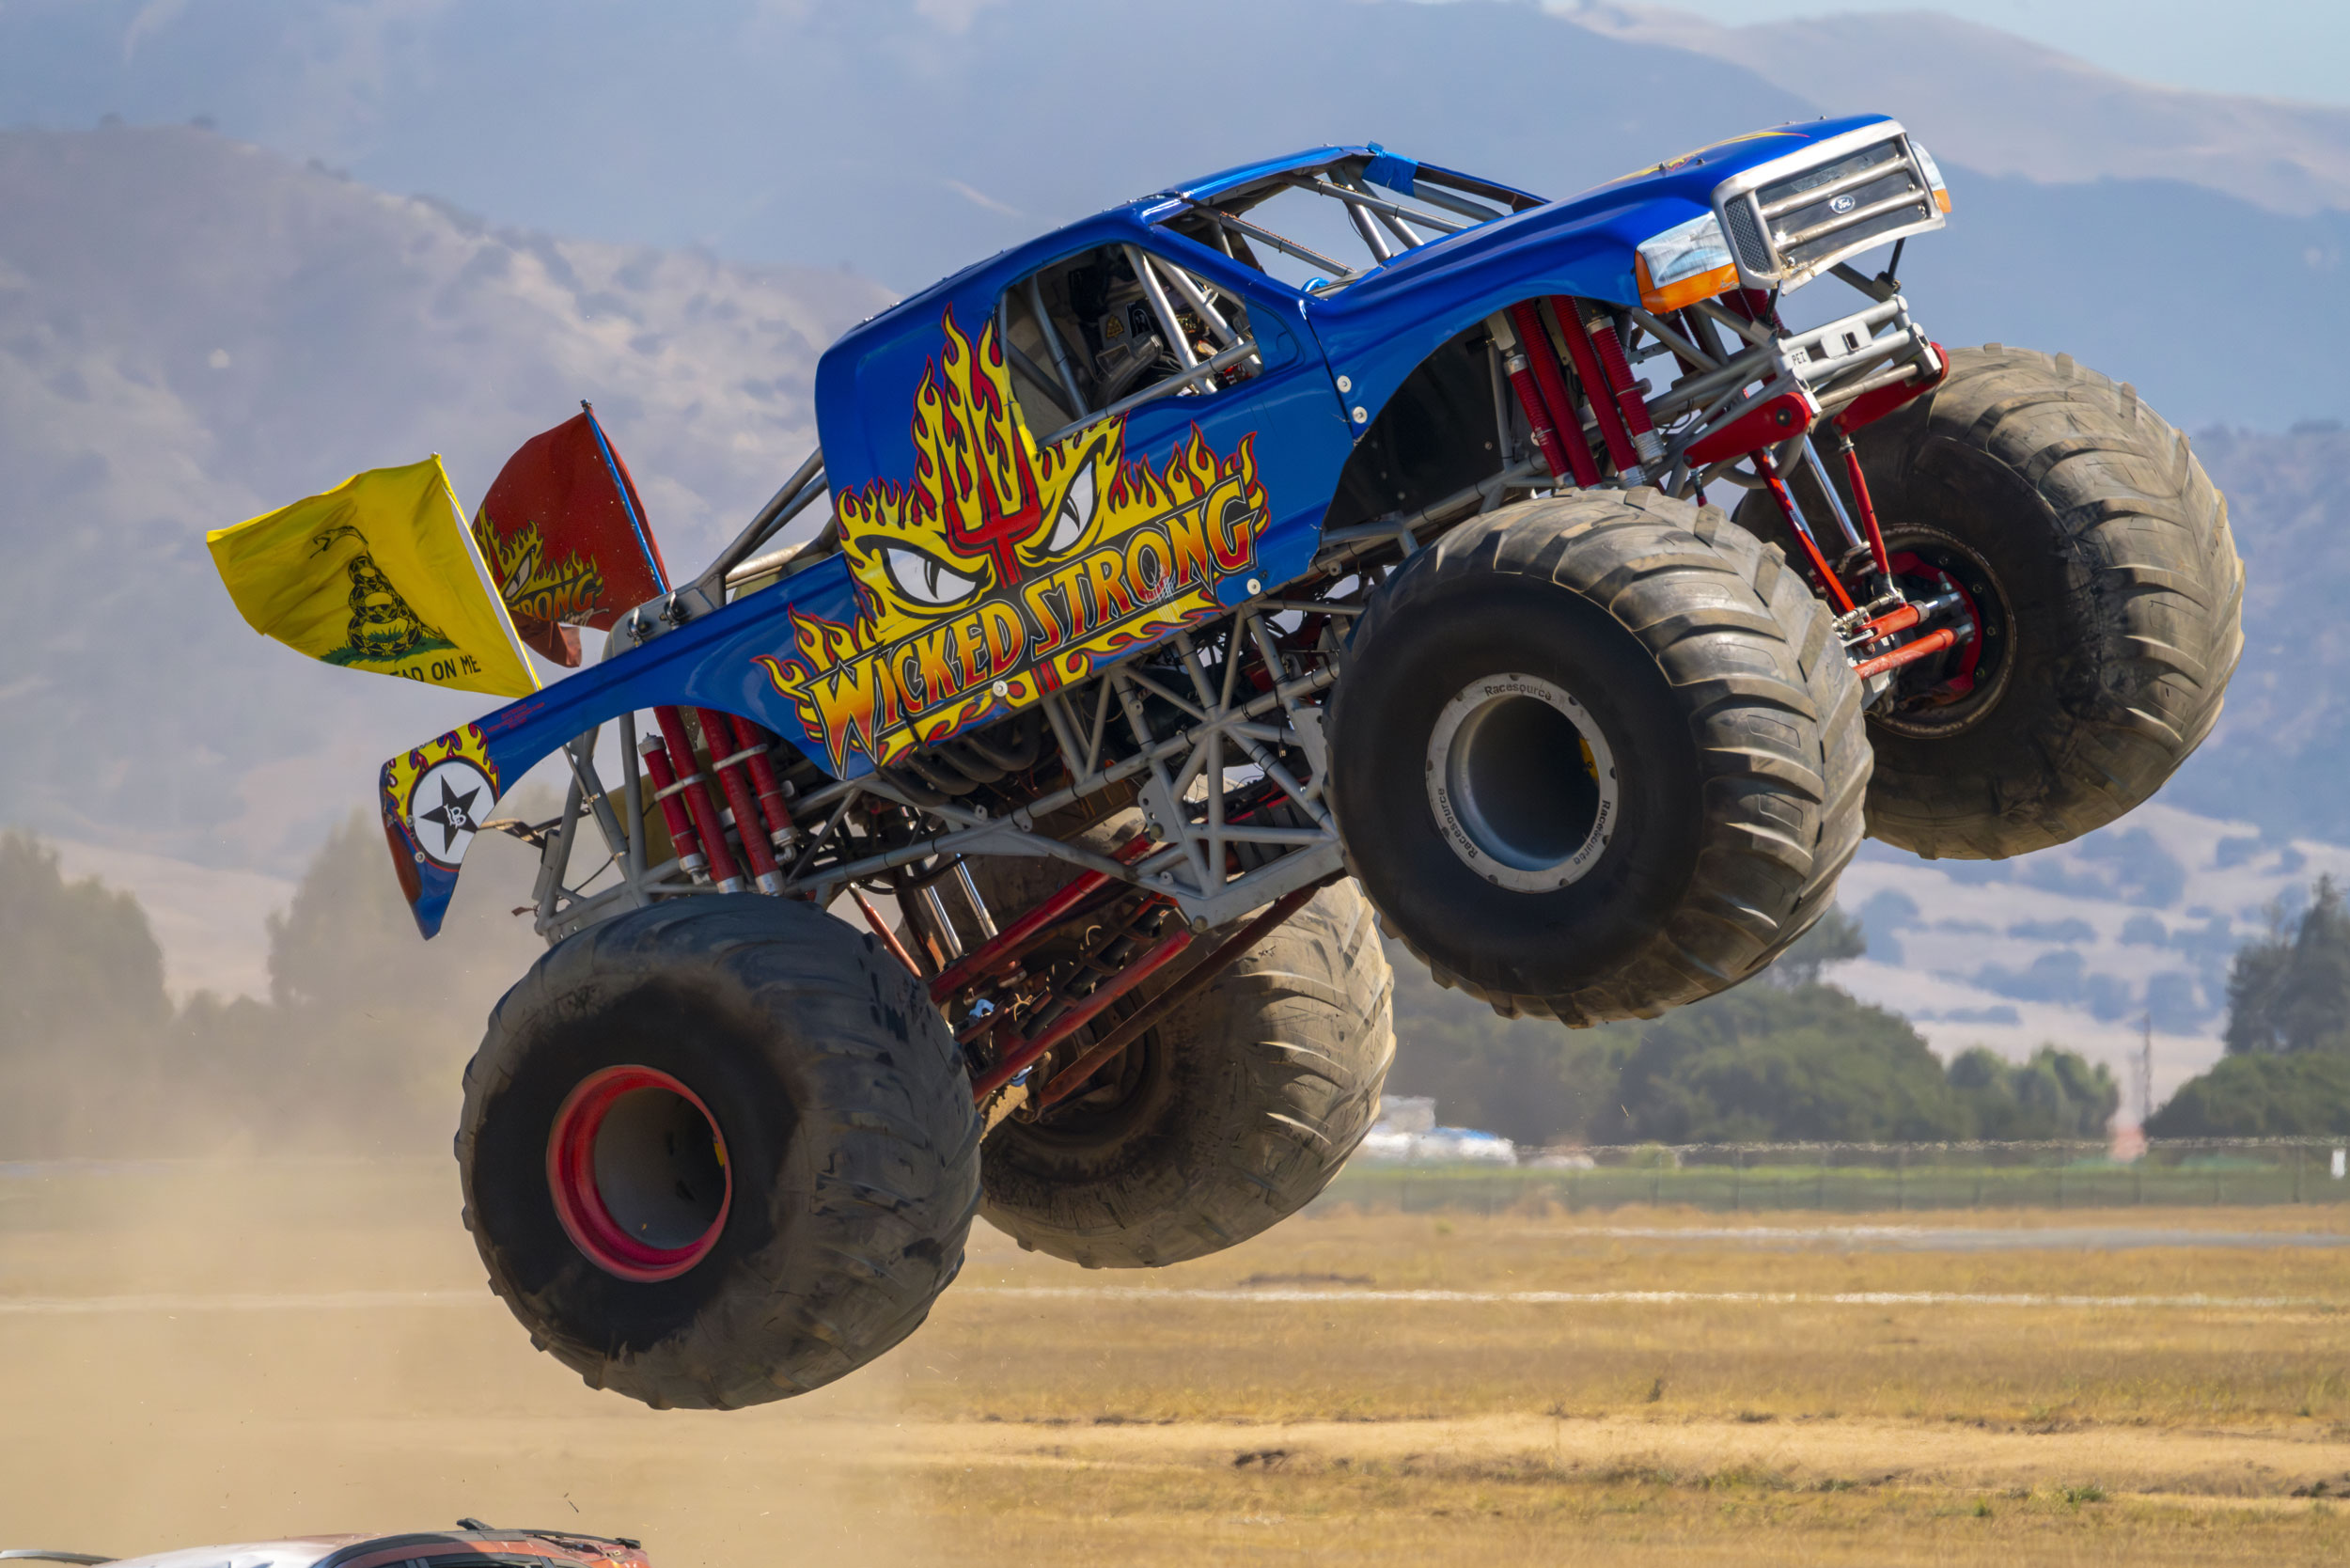 Monster Truck: Wicked Strong jumped over a carJ